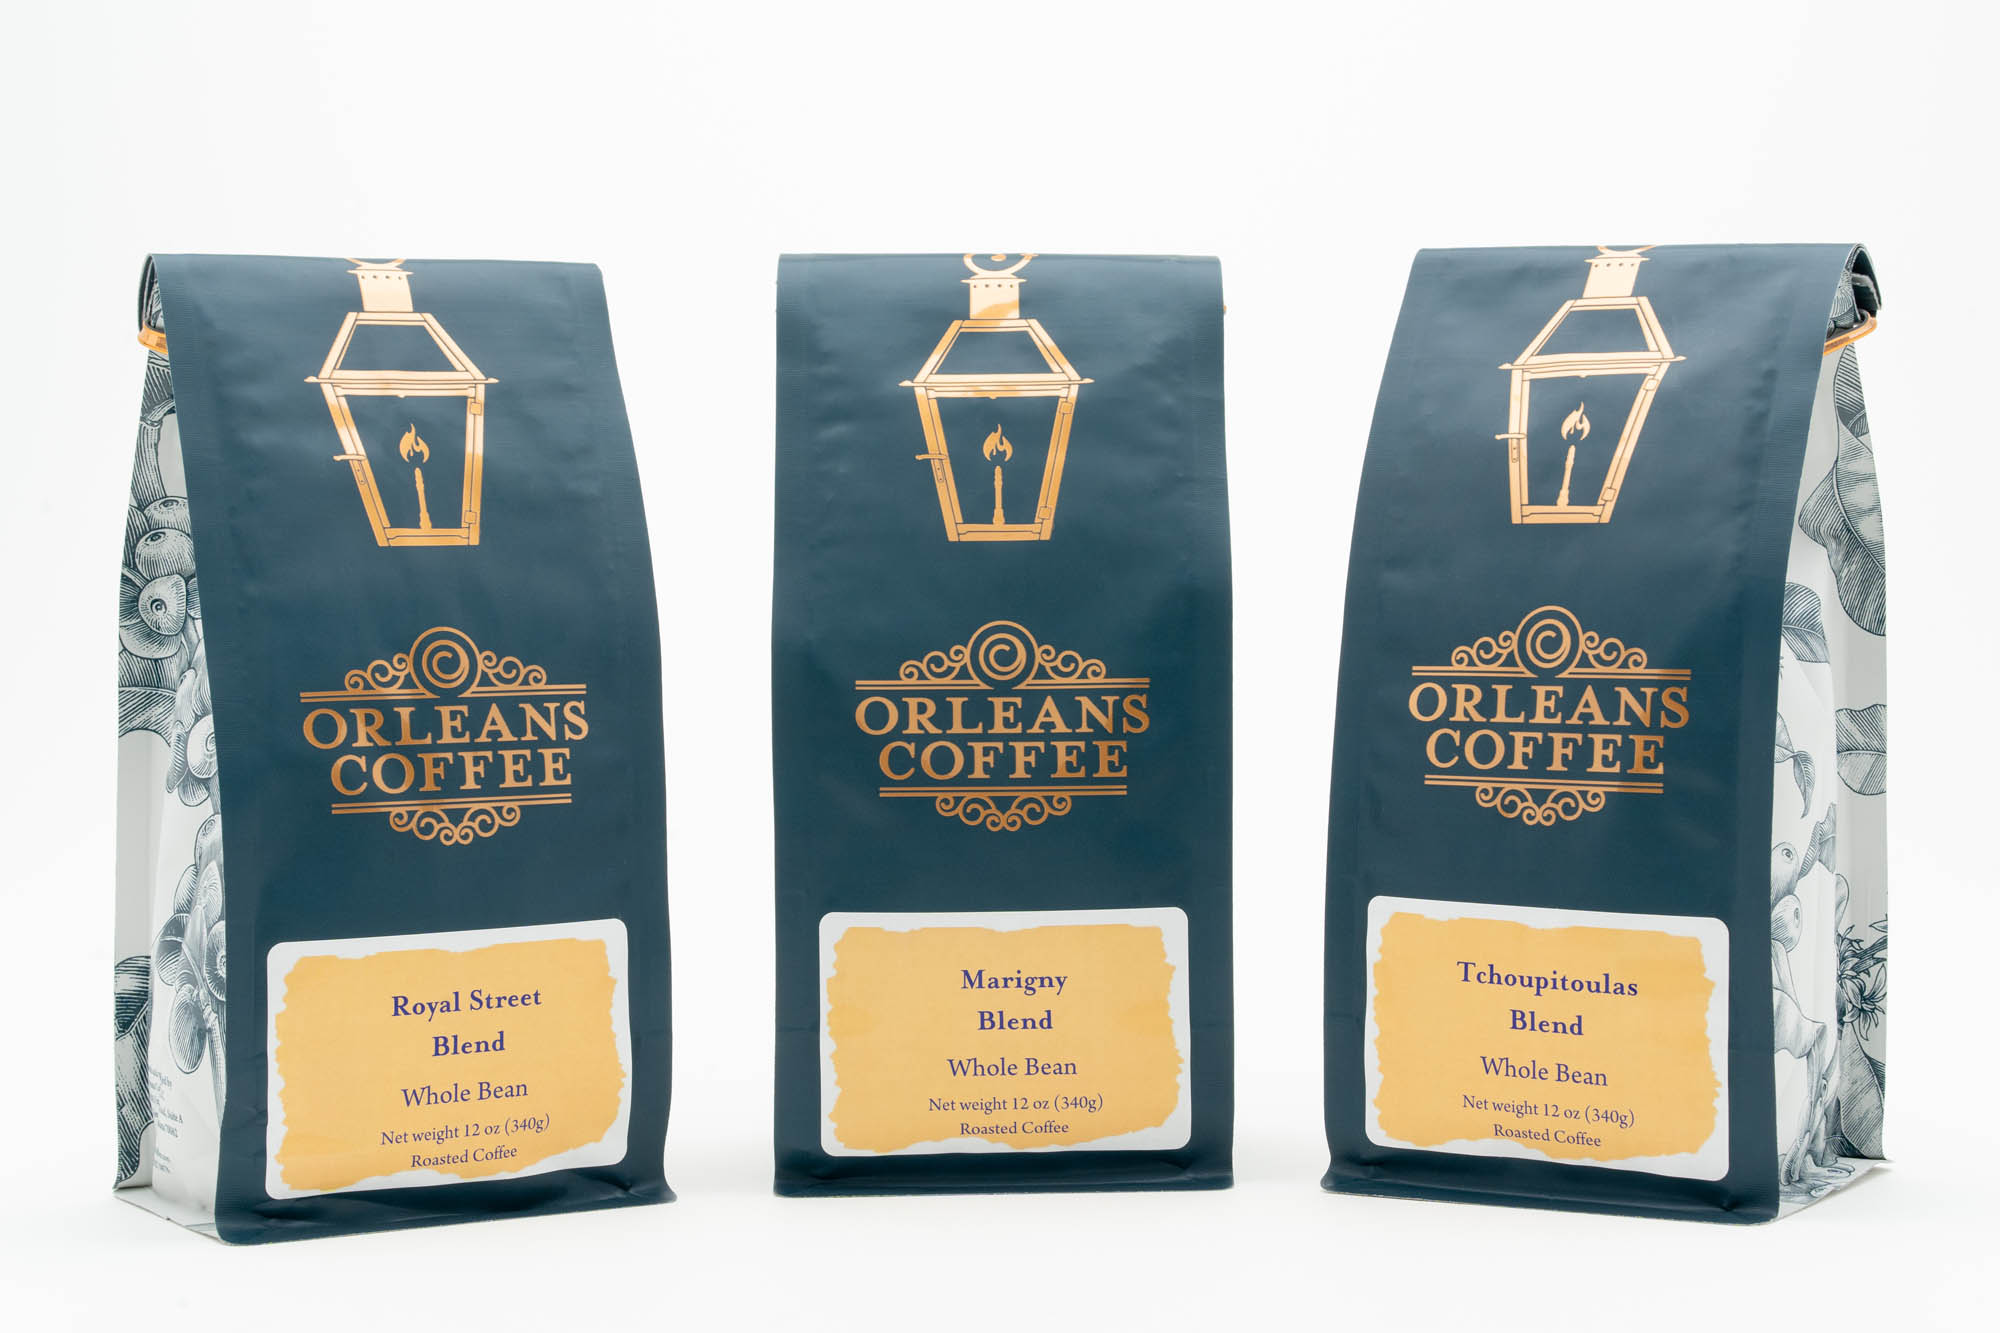 Three Orleans coffee bags different flavors